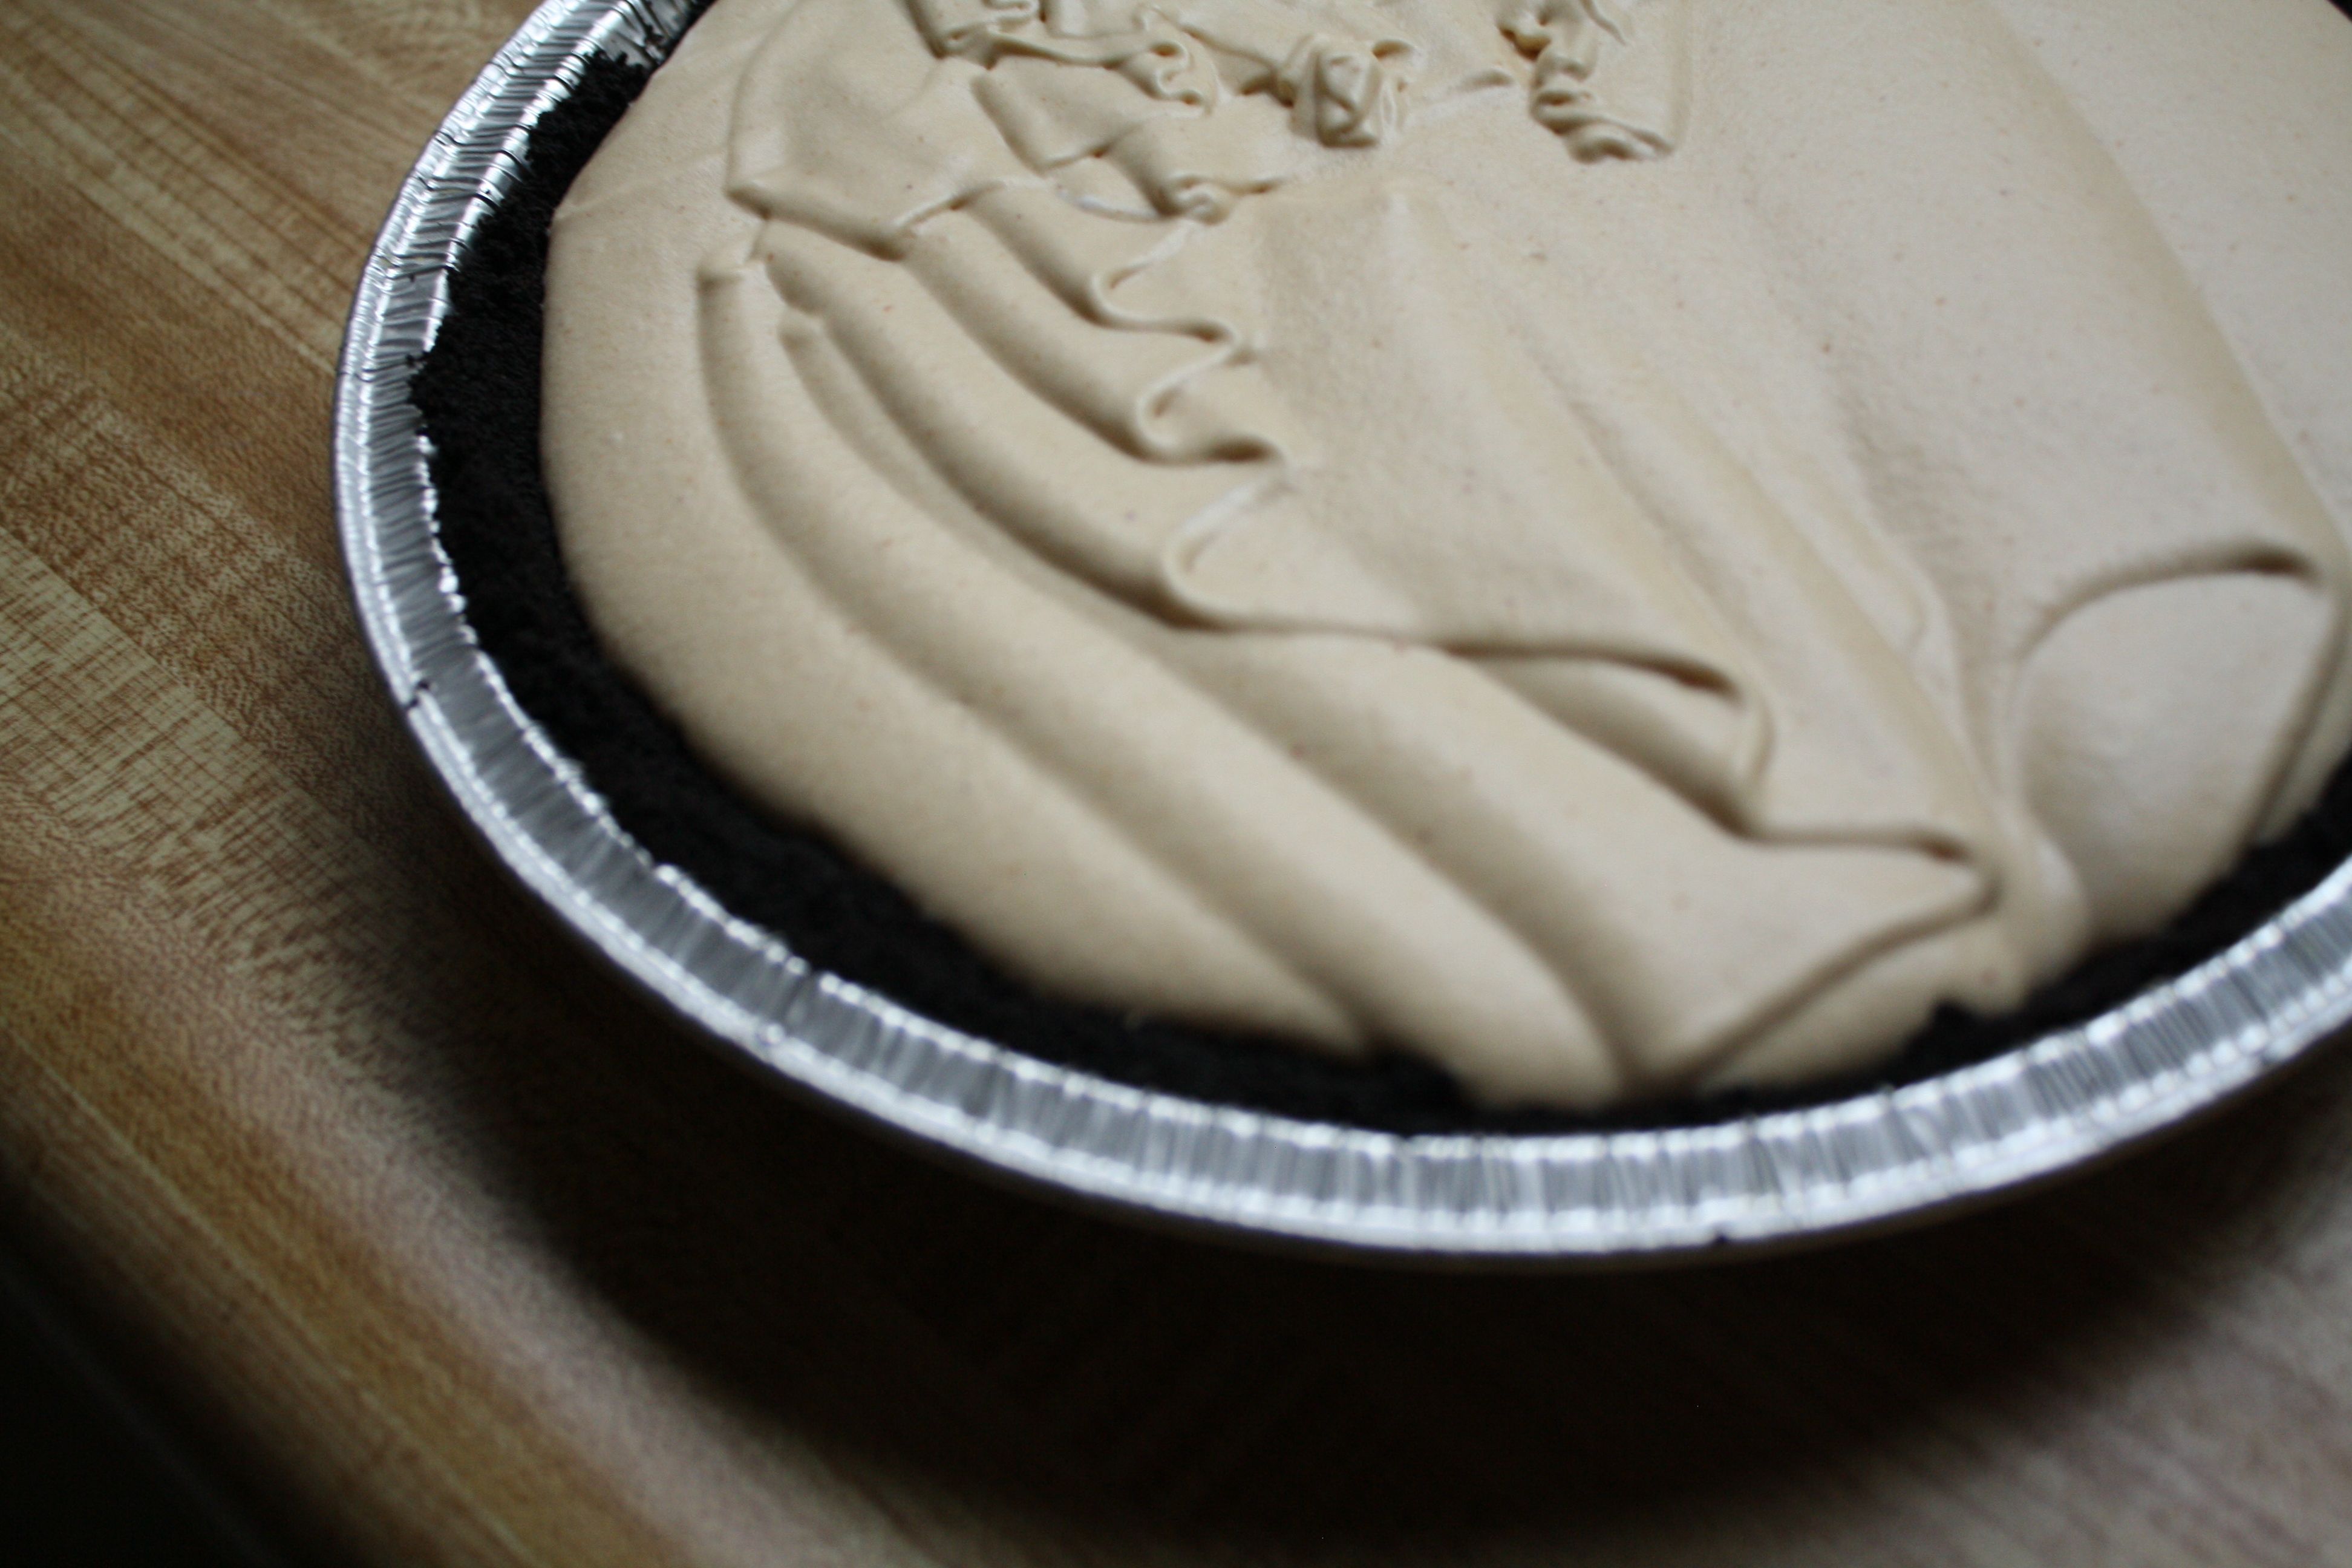 Peanut Butter Cream Pie for Mikey - august 12, 2011